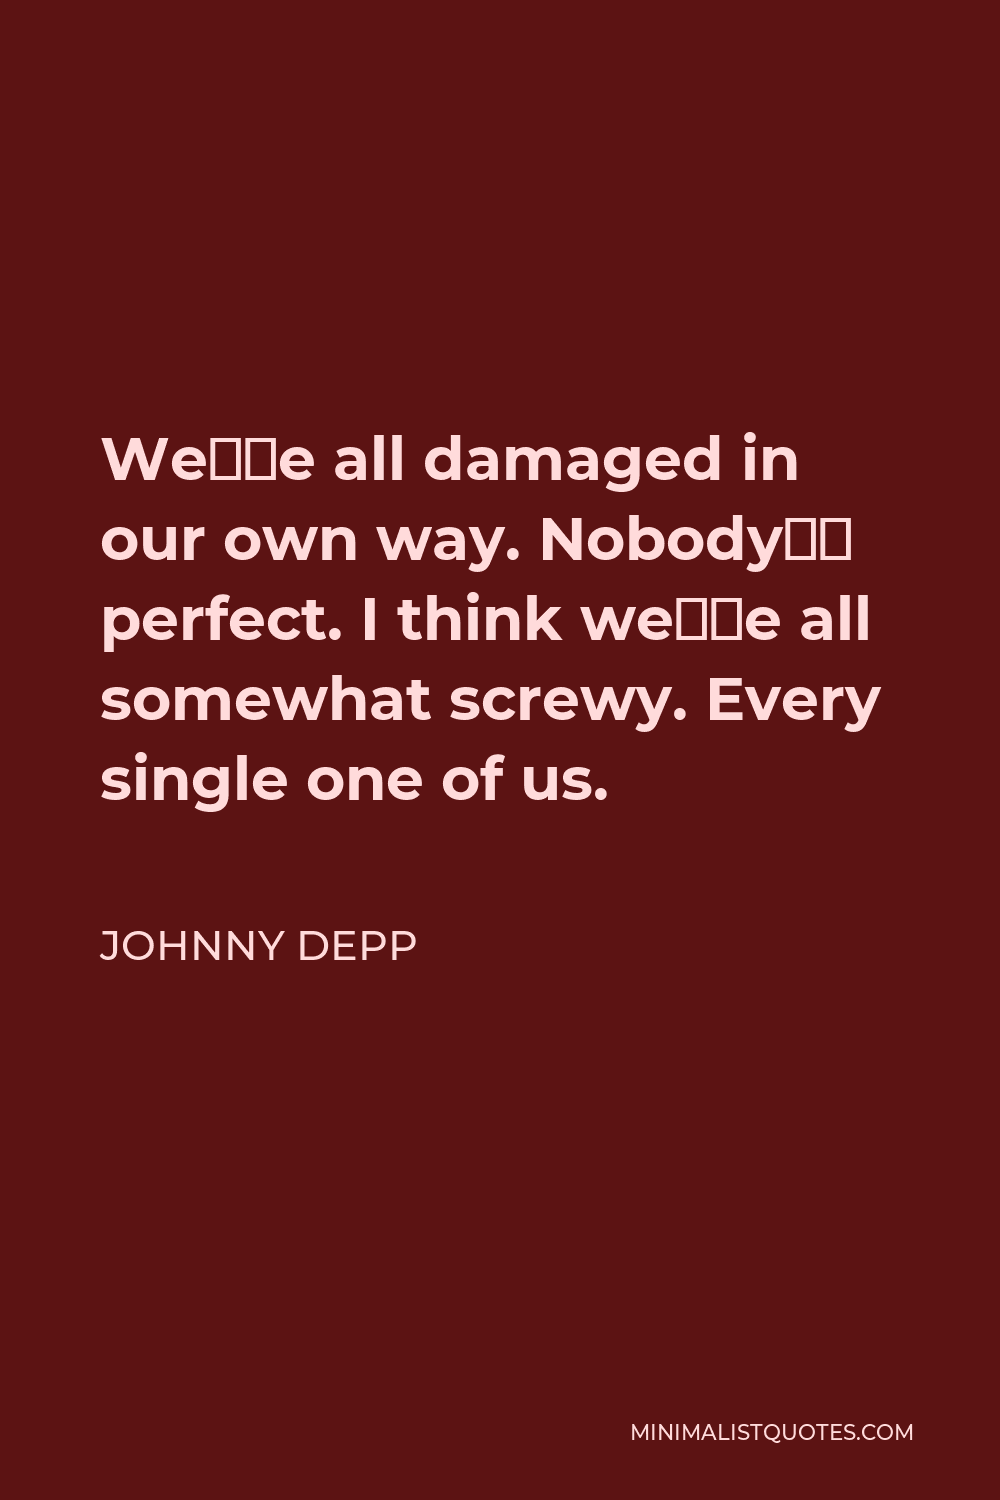 Johnny Depp Quote - We’re all damaged in our own way. Nobody’s perfect. I think we’re all somewhat screwy. Every single one of us.